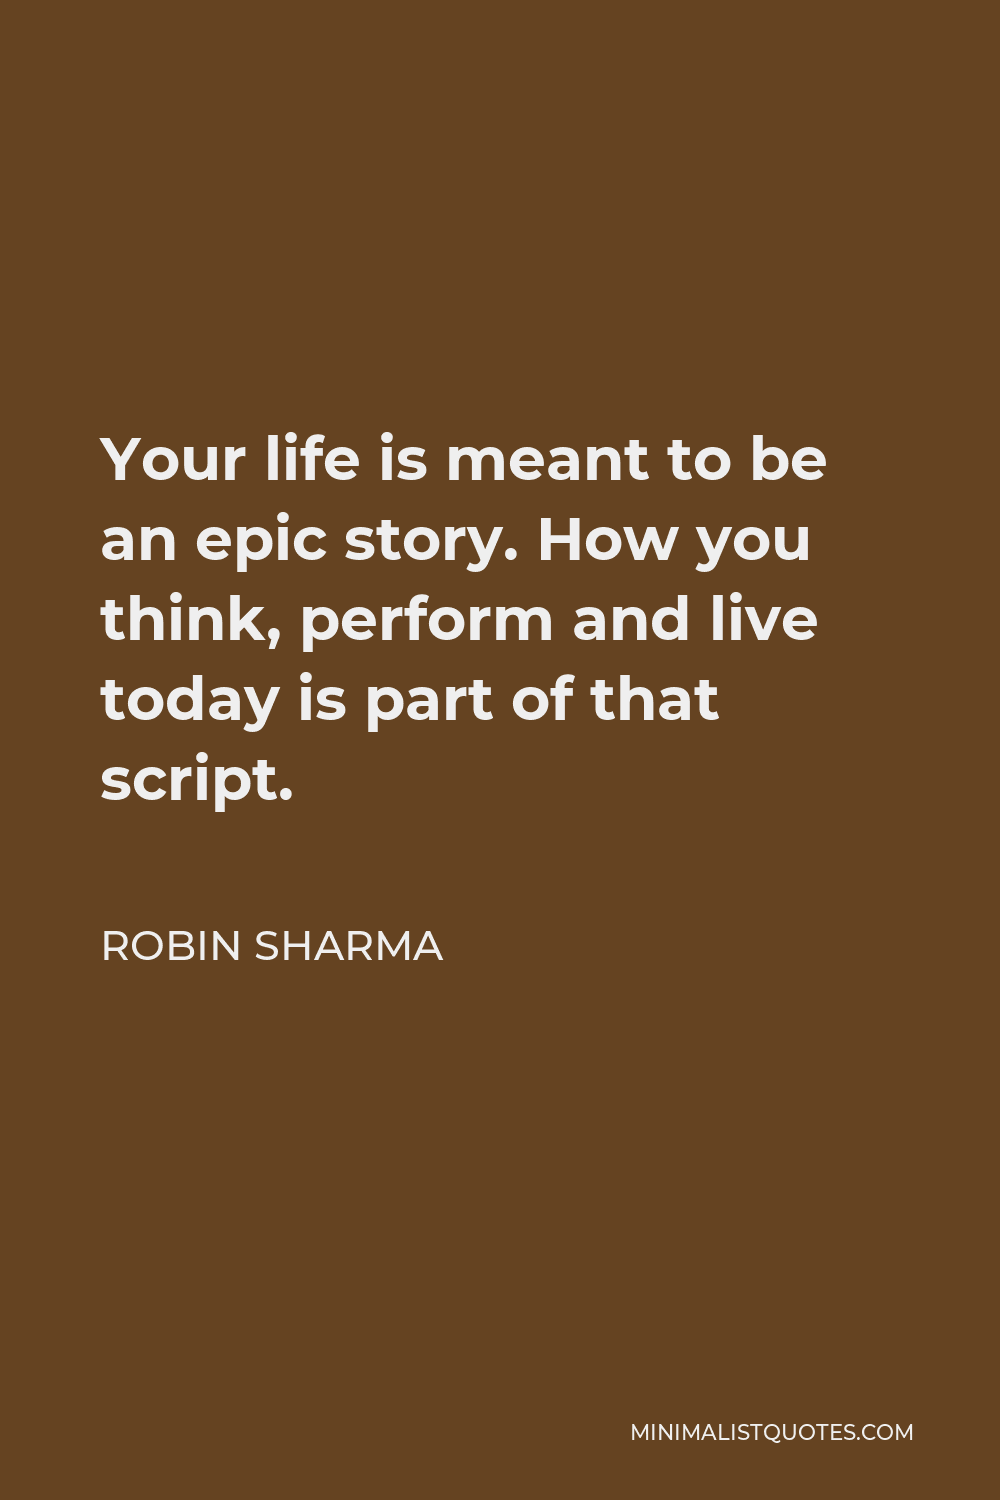 Robin Sharma Quote - Your life is meant to be an epic story. How you think, perform and live today is part of that script.